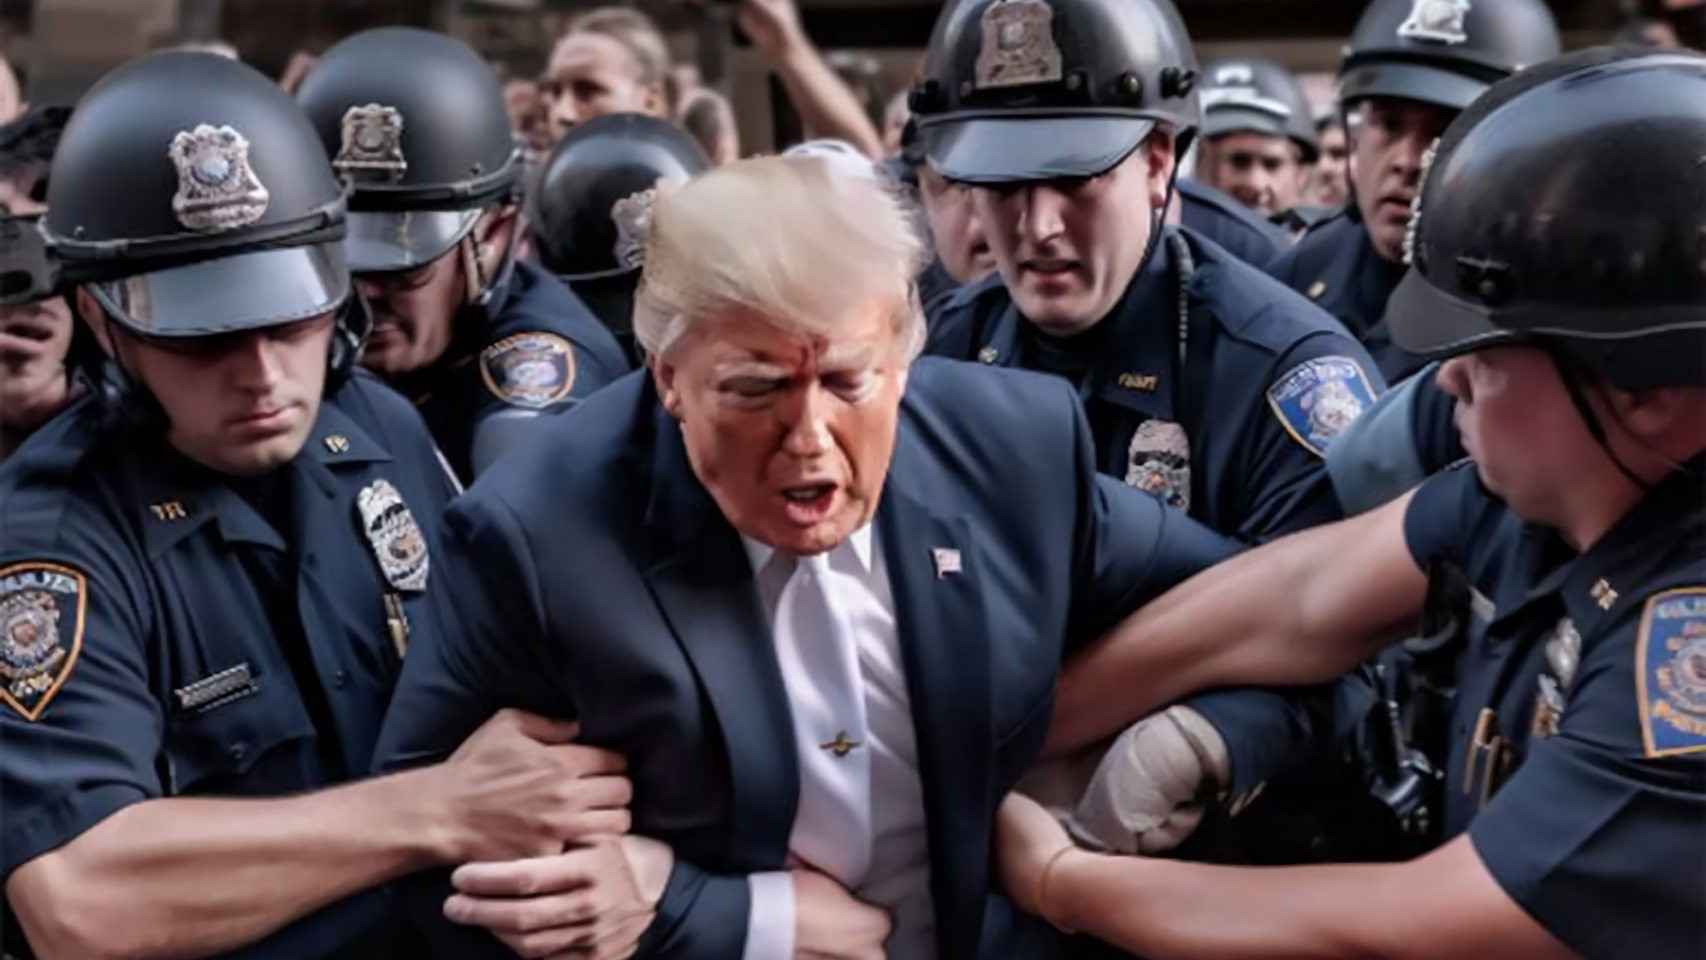 One of the viral images created by AI showed the arrest of Donald Trump